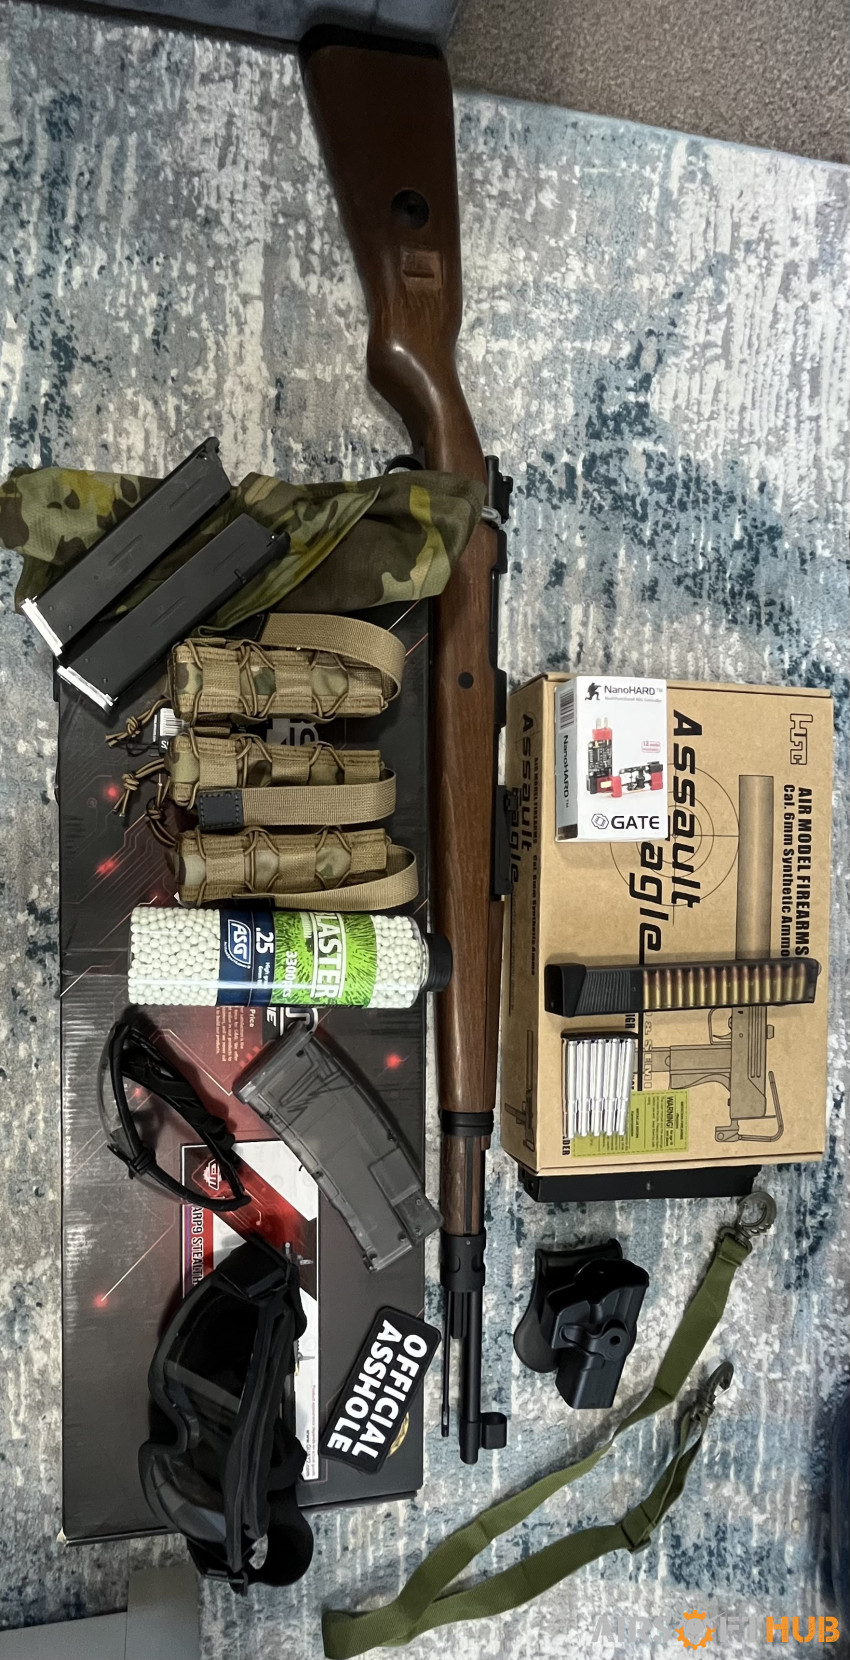 Bundle deal - Used airsoft equipment